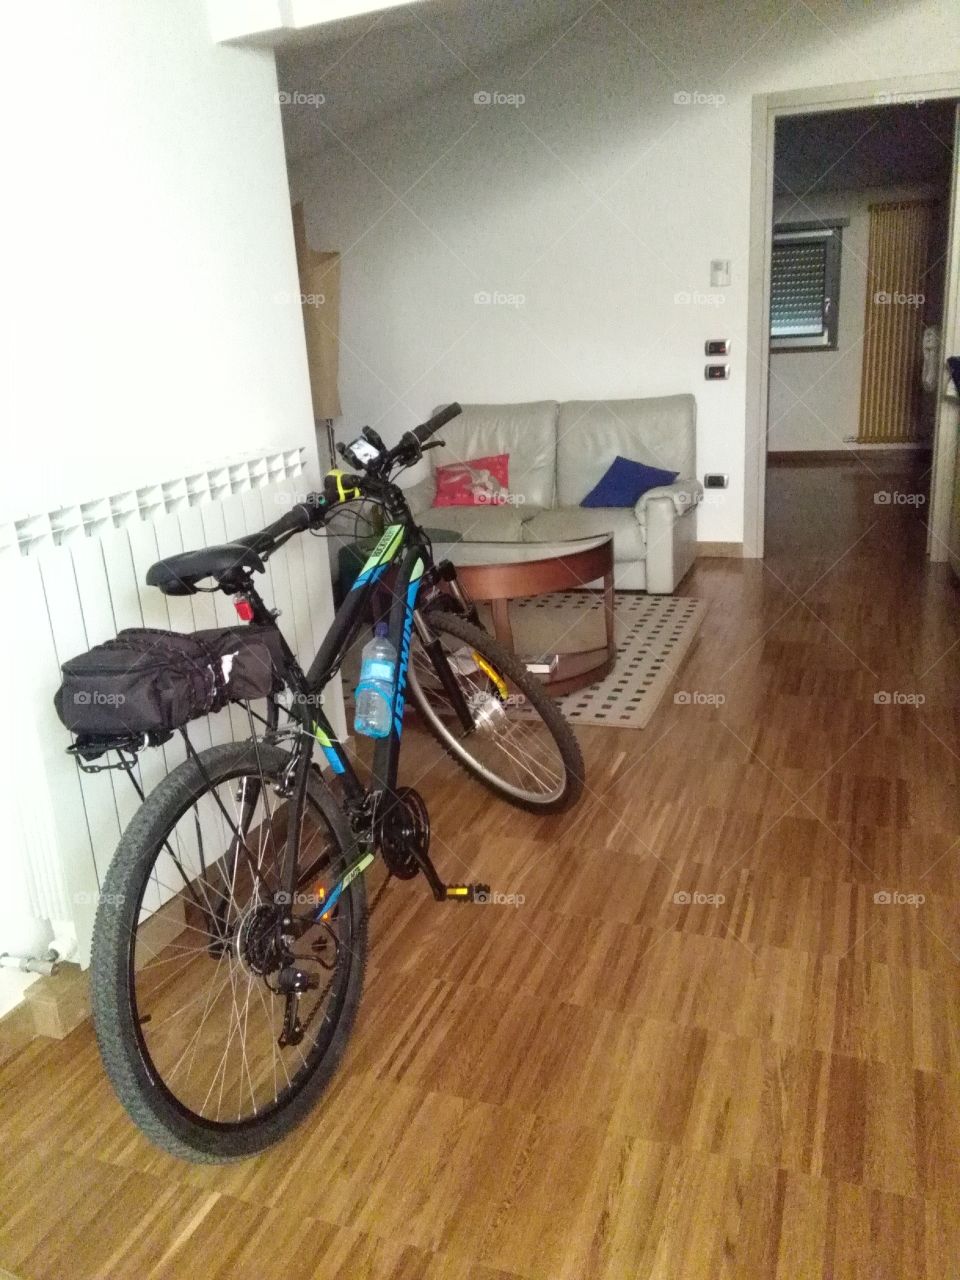 Electric bicycle in the living room